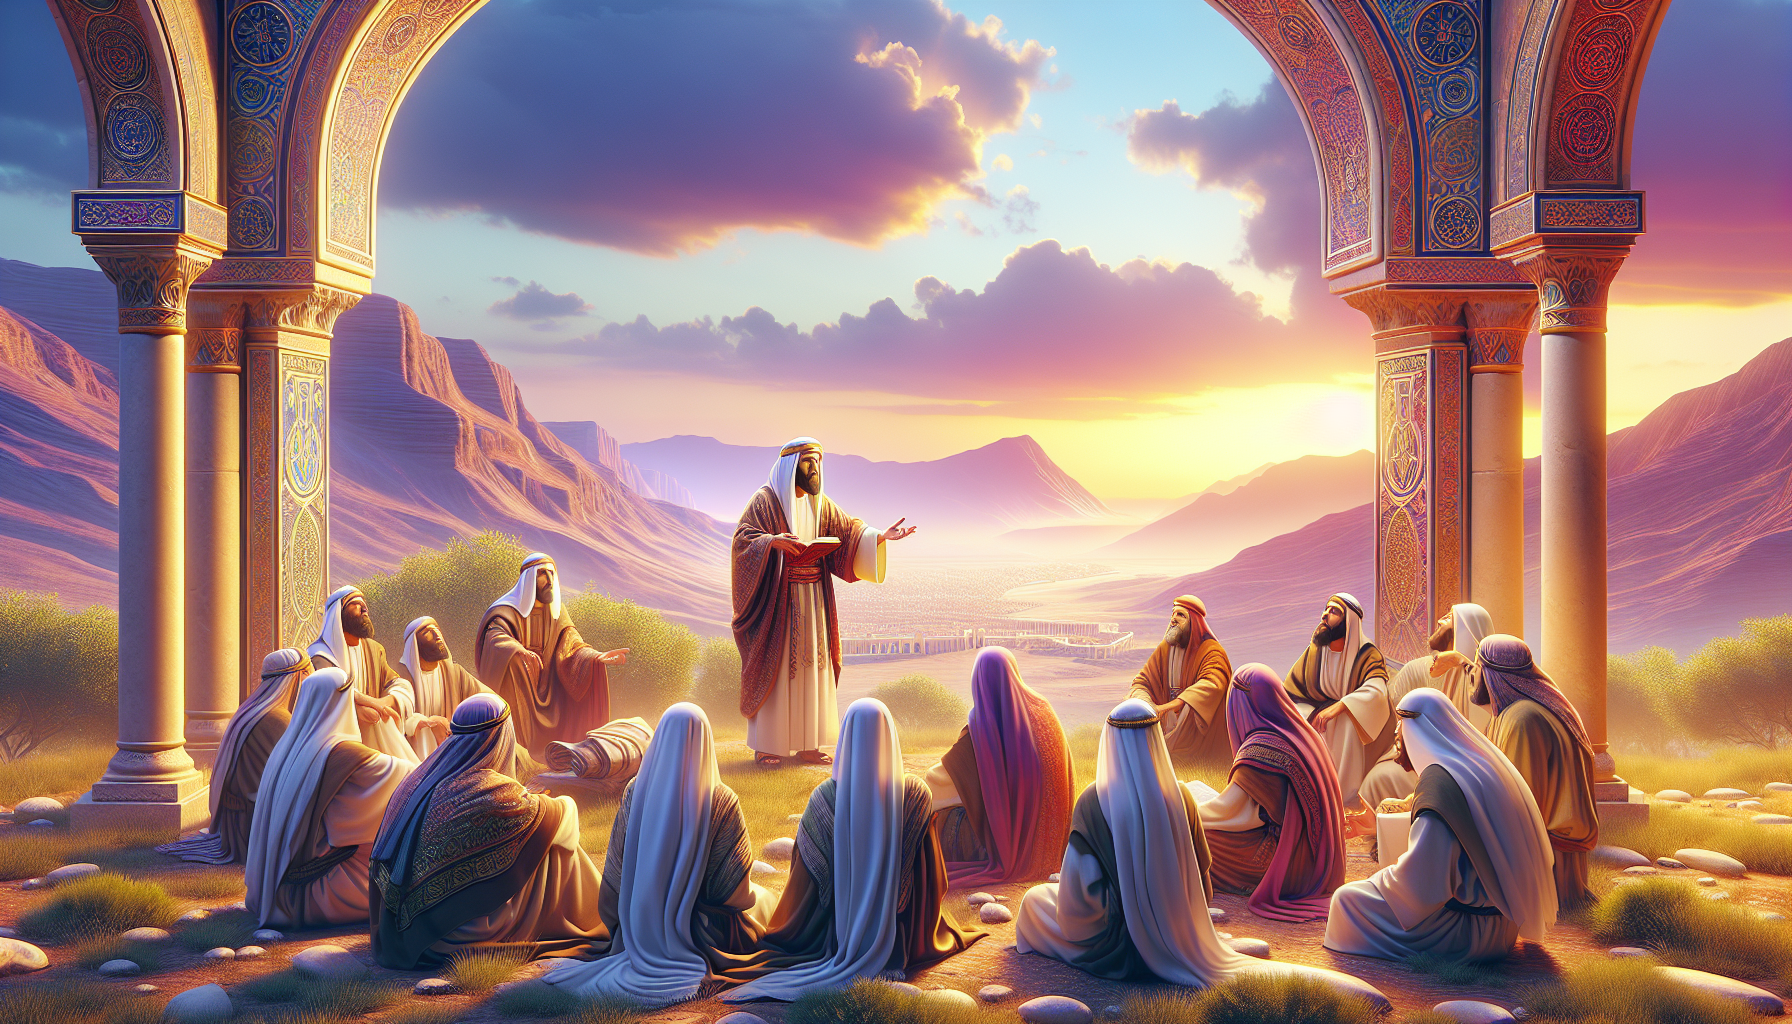 An artistic interpretation of Jesus teaching His disciples the importance of prayer, set in a serene, ancient Middle Eastern landscape during sunset, with detailed biblical clothing and a vibrant sky